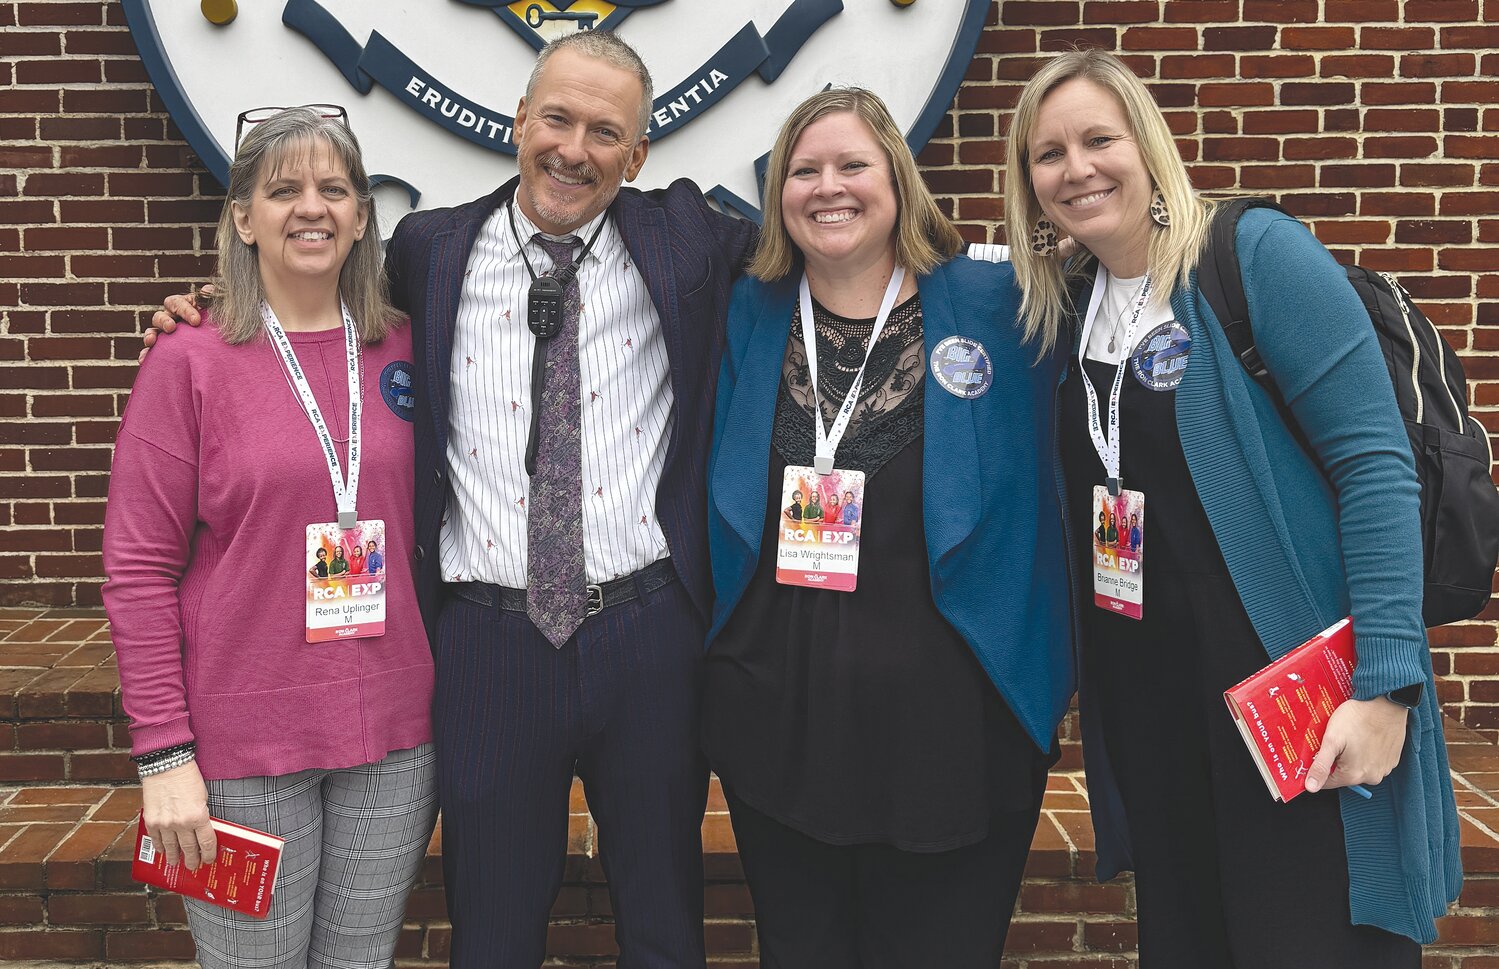 Pictured, from left, are  Rena Uplinger, Ron Clark, Lisa Wrightsman, and Brianne Bridge.